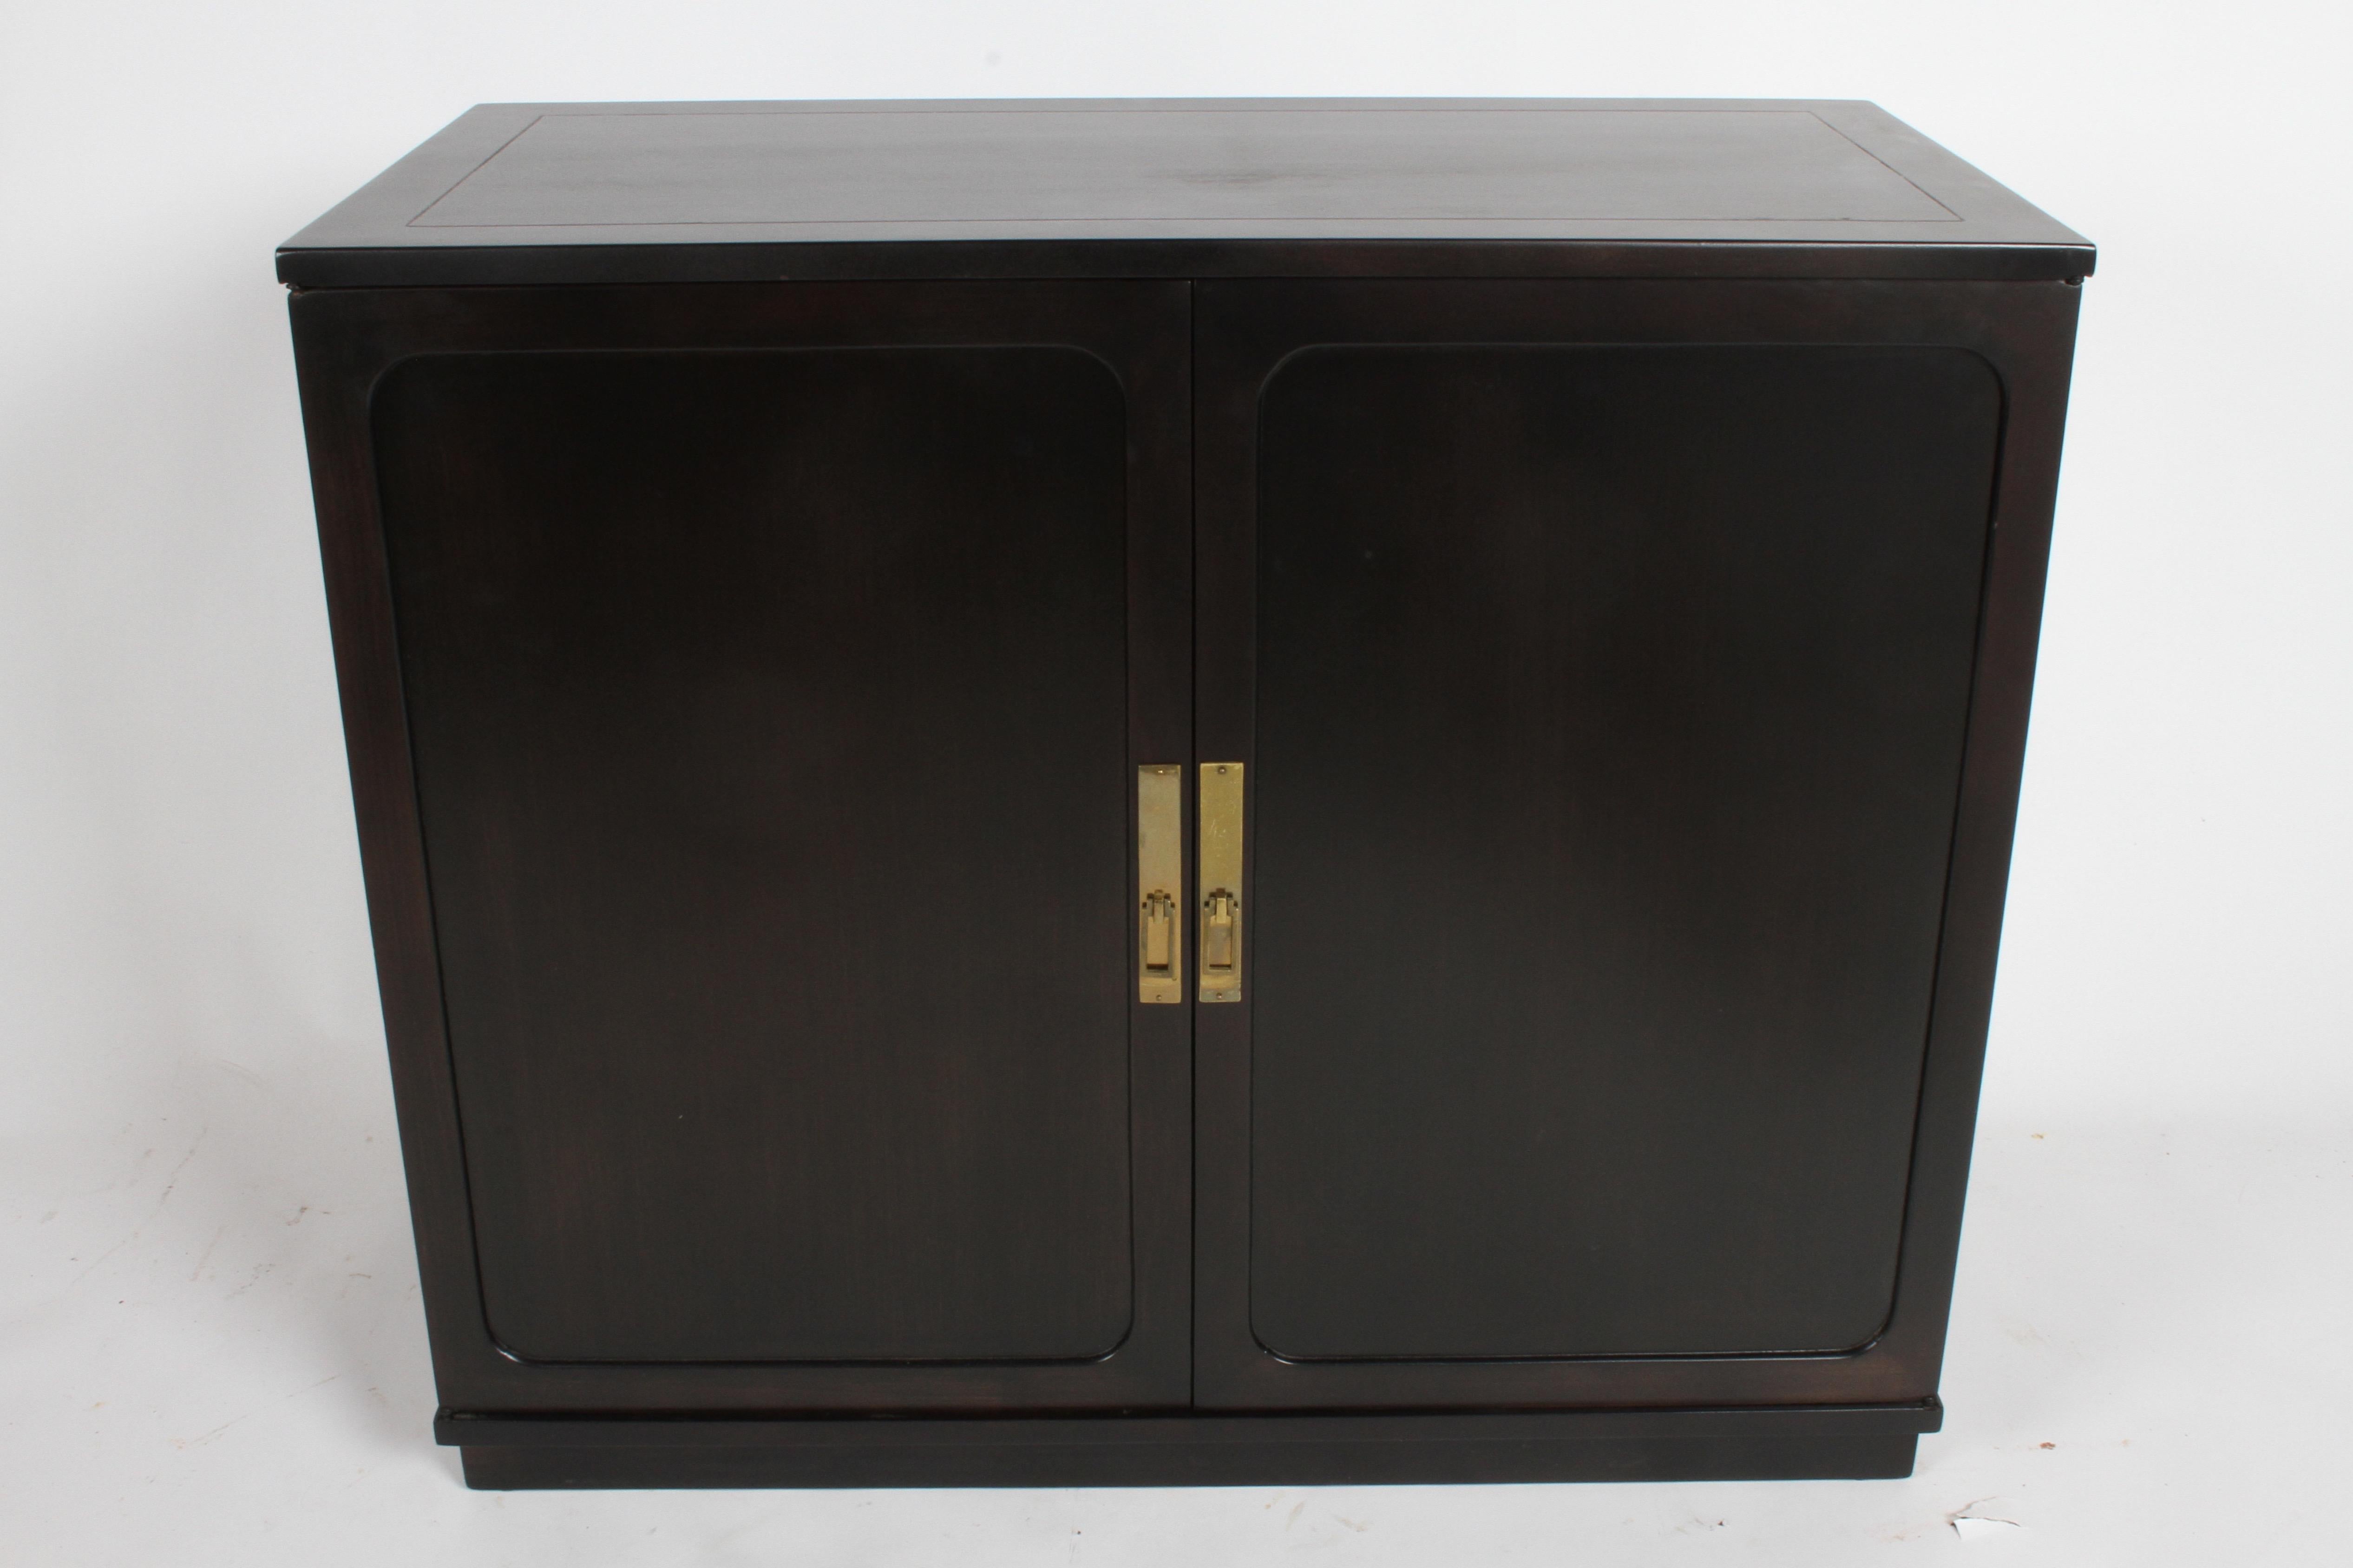 Edward Wormley two-door cabinet in ebonized silver elm with brass hardware, circa 1948. The one shown has recently sold, but have another with different hardware available, please inquire. Interior has two sliding drawers over open space. Drawers